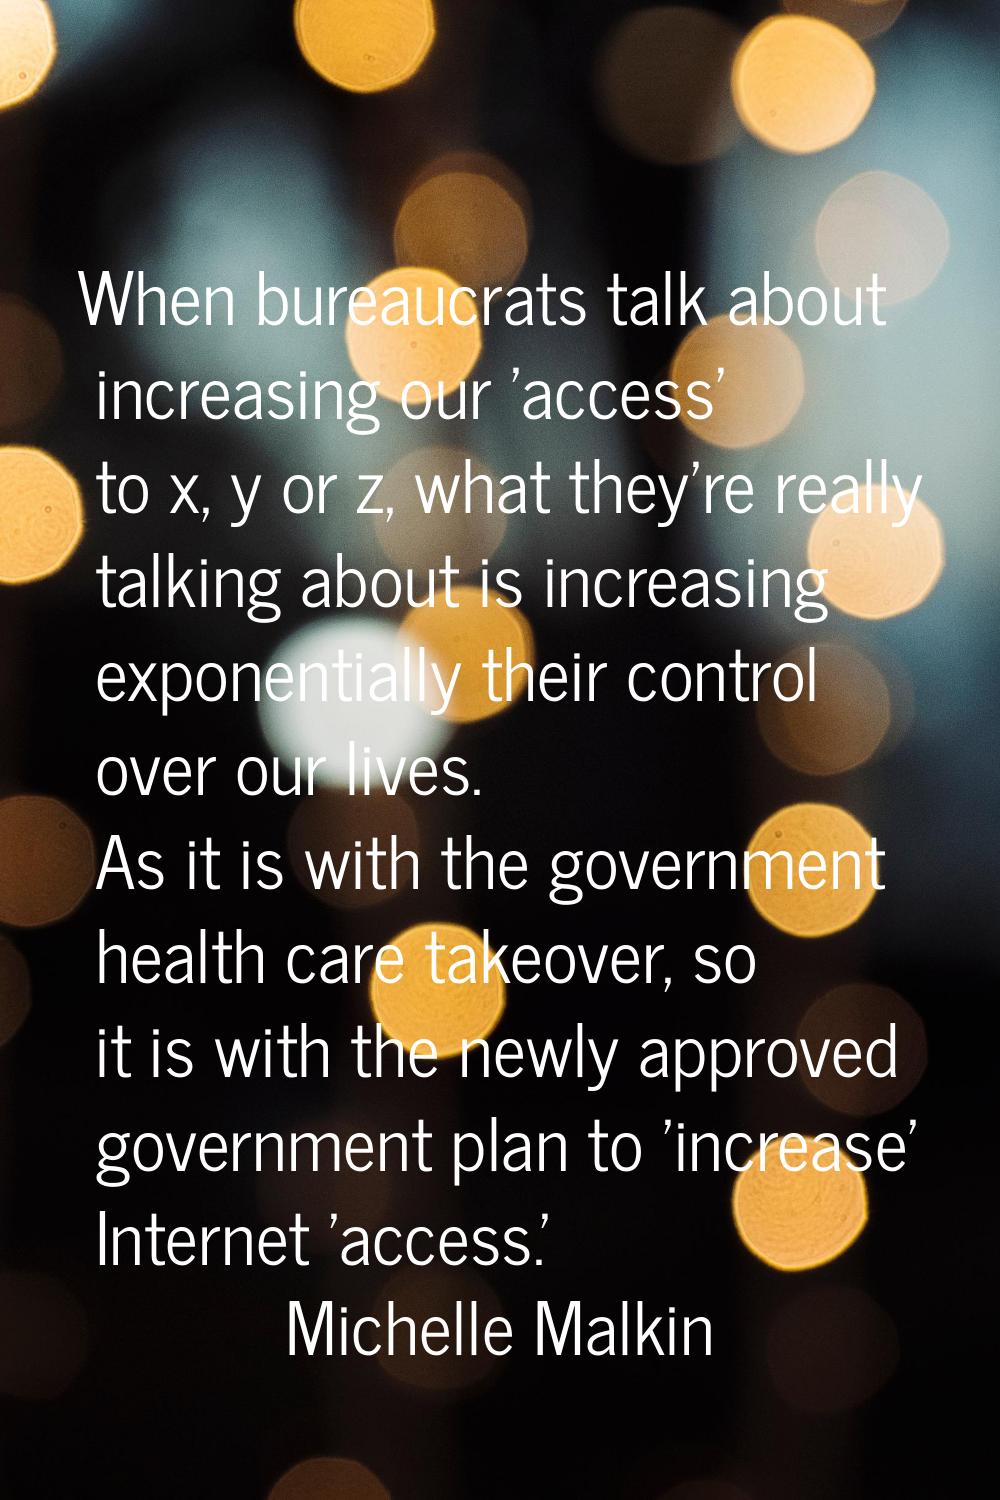 When bureaucrats talk about increasing our 'access' to x, y or z, what they're really talking about